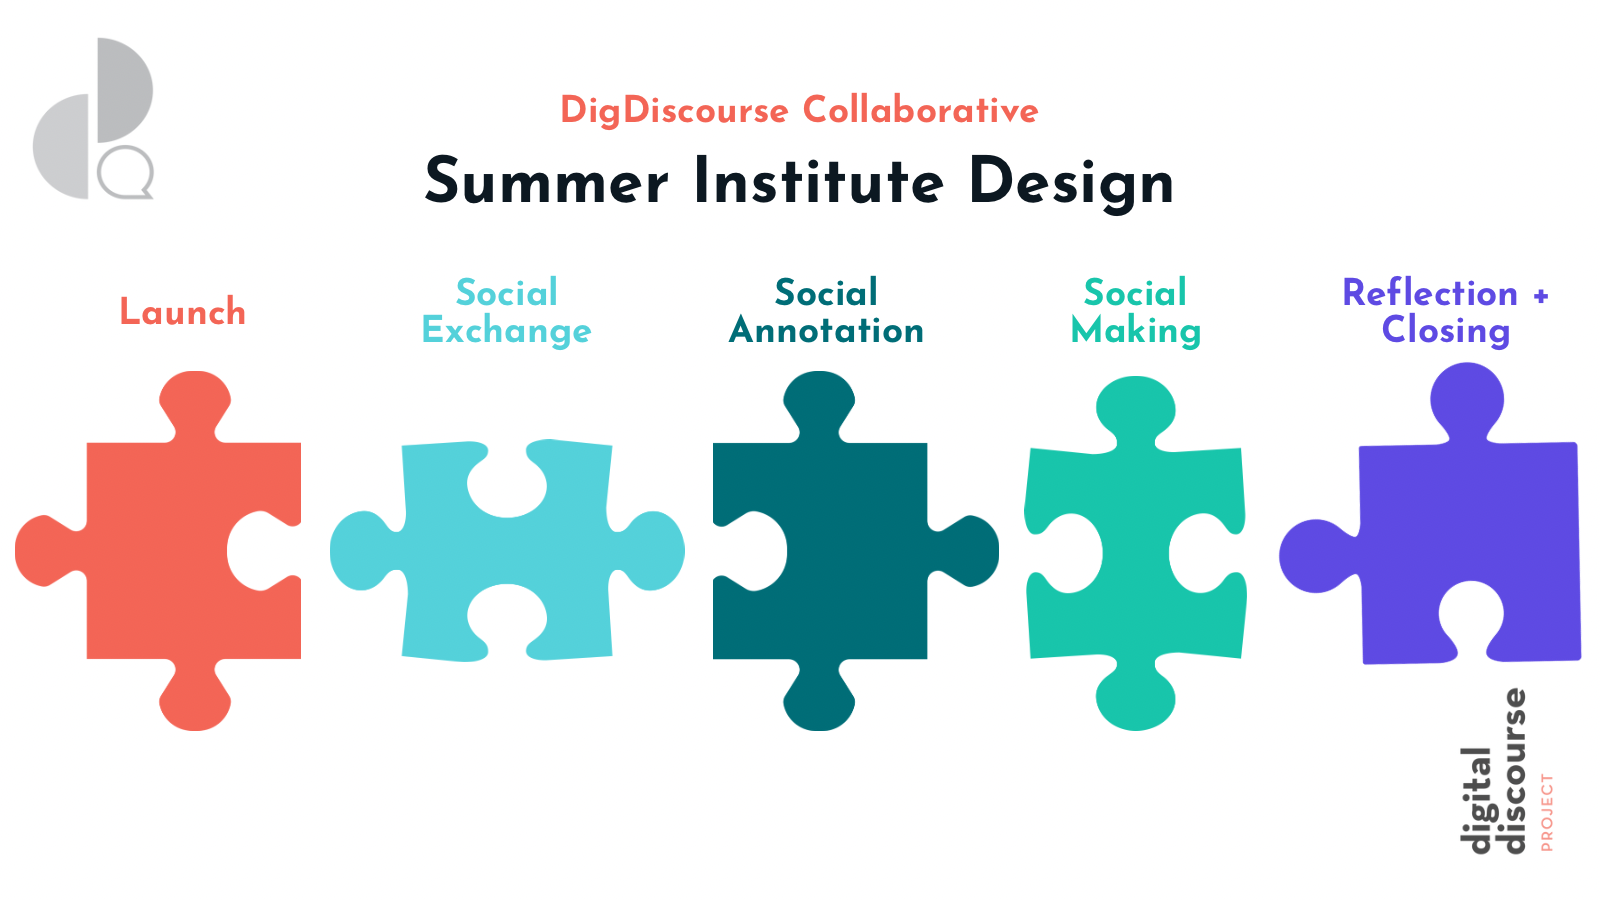 An infographic of the DigDiscourse Collaborative's Summer Institute Design. It shows 5 puzzle pieces that fit together - the first is a Launch, the second is "Social Exchange," the third is "Social Annotation," and fourth is "Social Making," and the fifth is "Reflection + Closing." It includes the logo and name of the Digital Discourse Project.